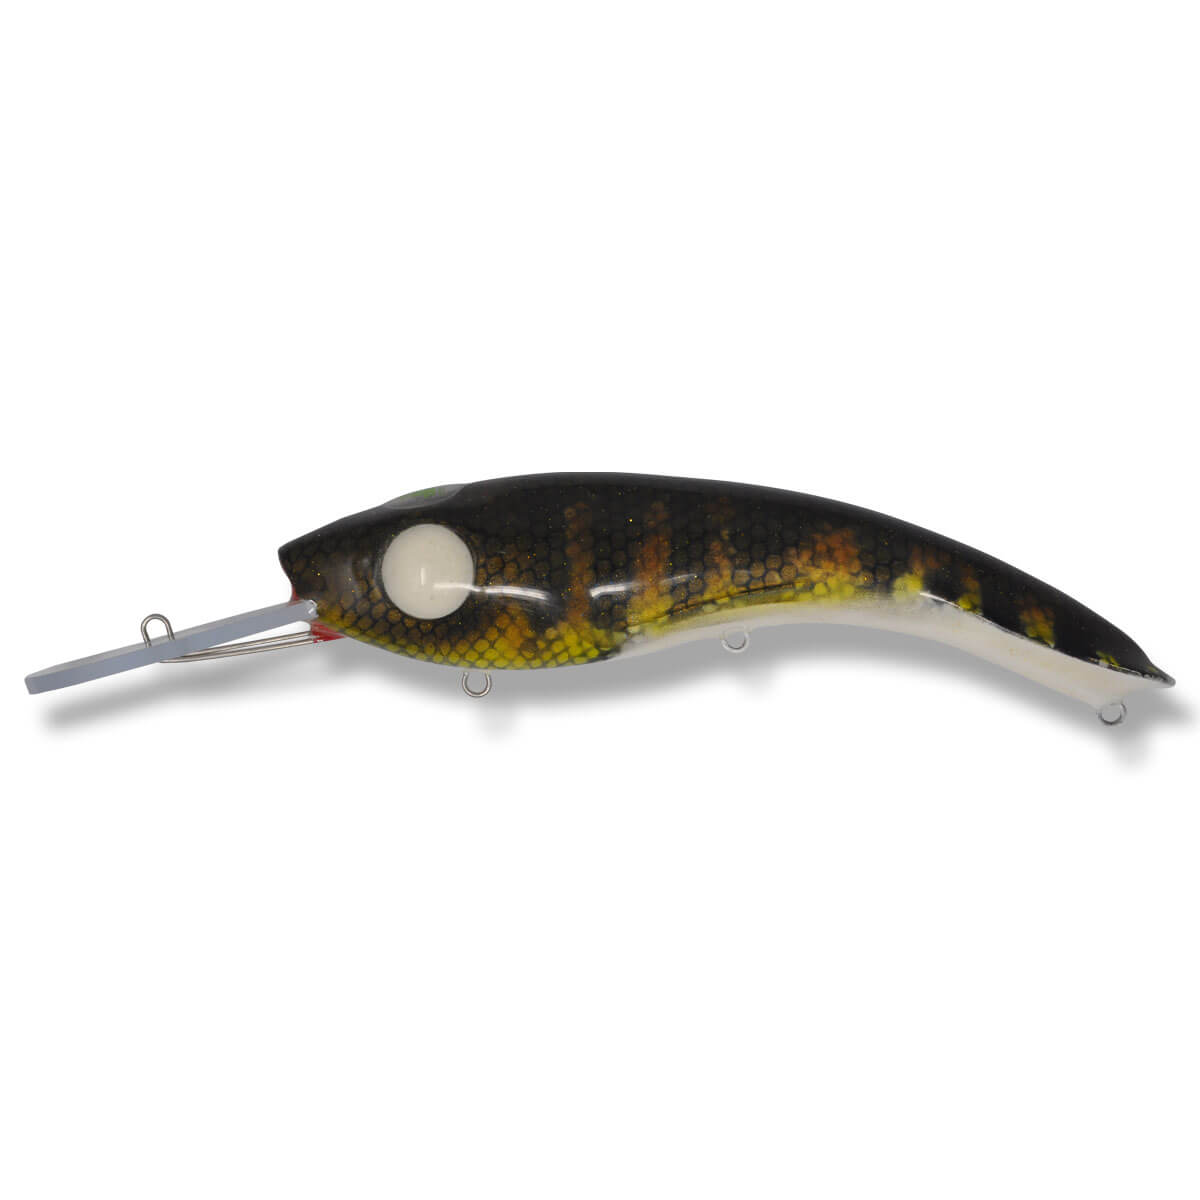 View of Crankbaits One Shot Tackle Perchosaurus 10" Crankbait Walleye available at EZOKO Pike and Musky Shop